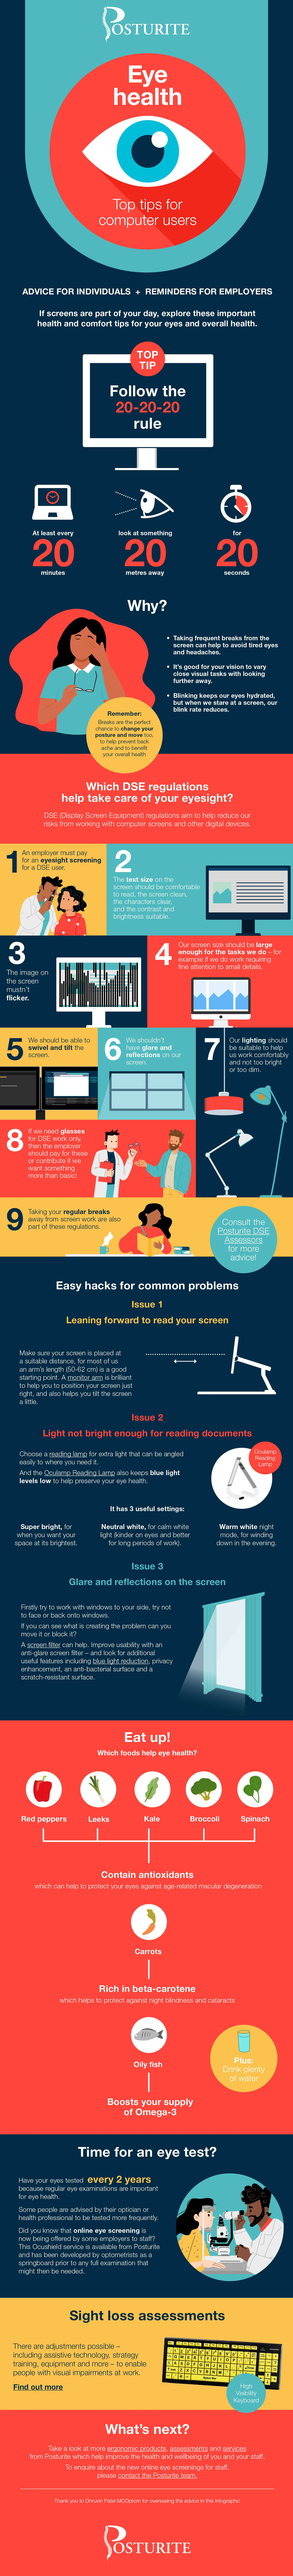 Eye health for computer users infographic